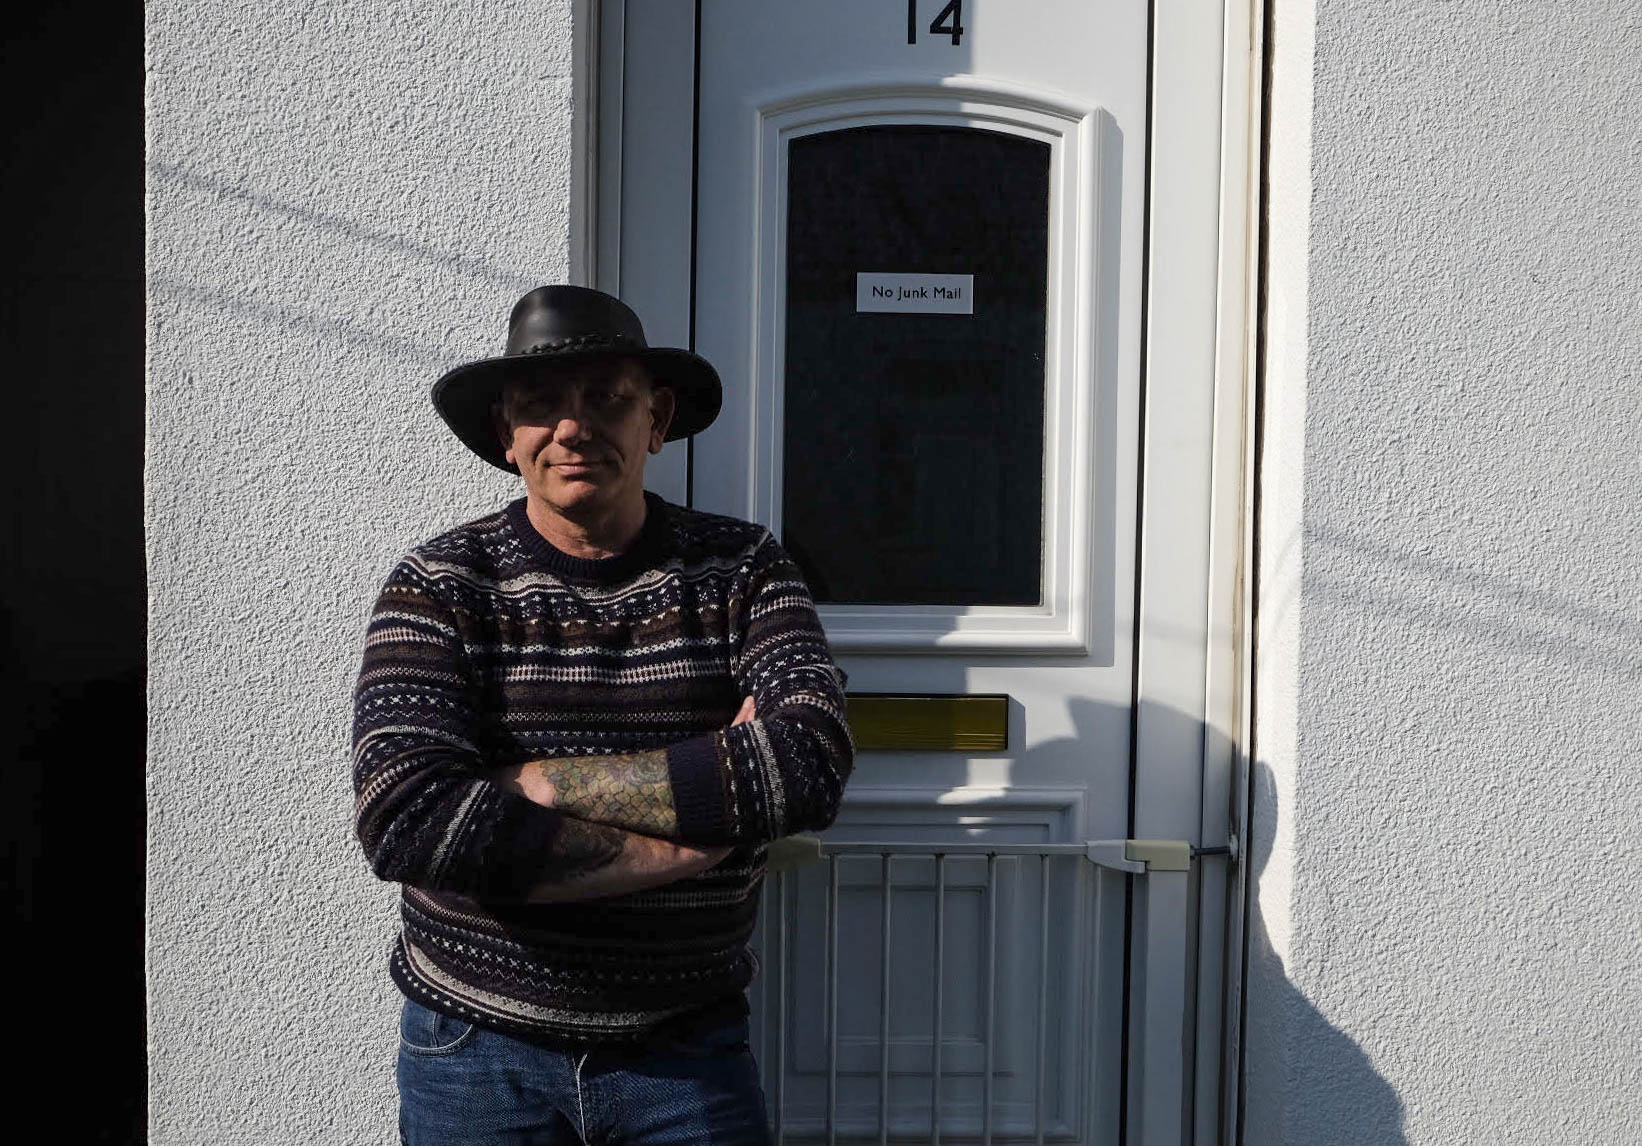 Former fisherman Ray Michalson, 61, stands outside his home in Grimsby, U.K., on May 27, 2016. (Photograph by Tara John)